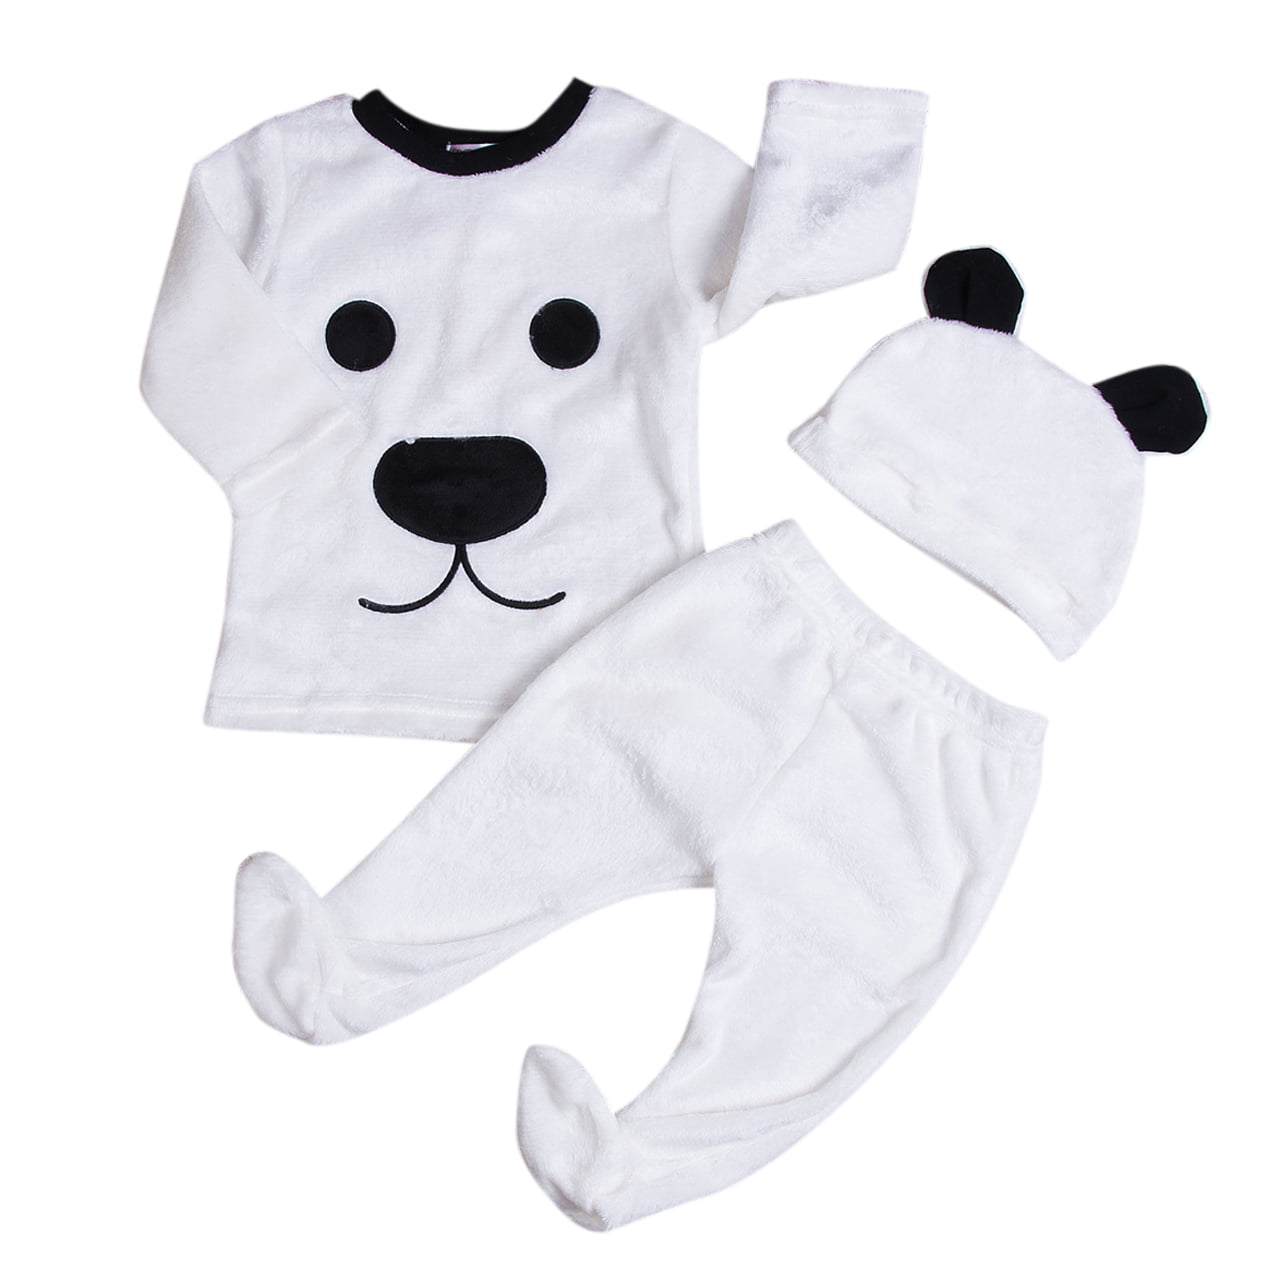 Newborn Baby Boys Girls Clothes Long Sleeve Tops Pants Trousers Hat Outfits Set